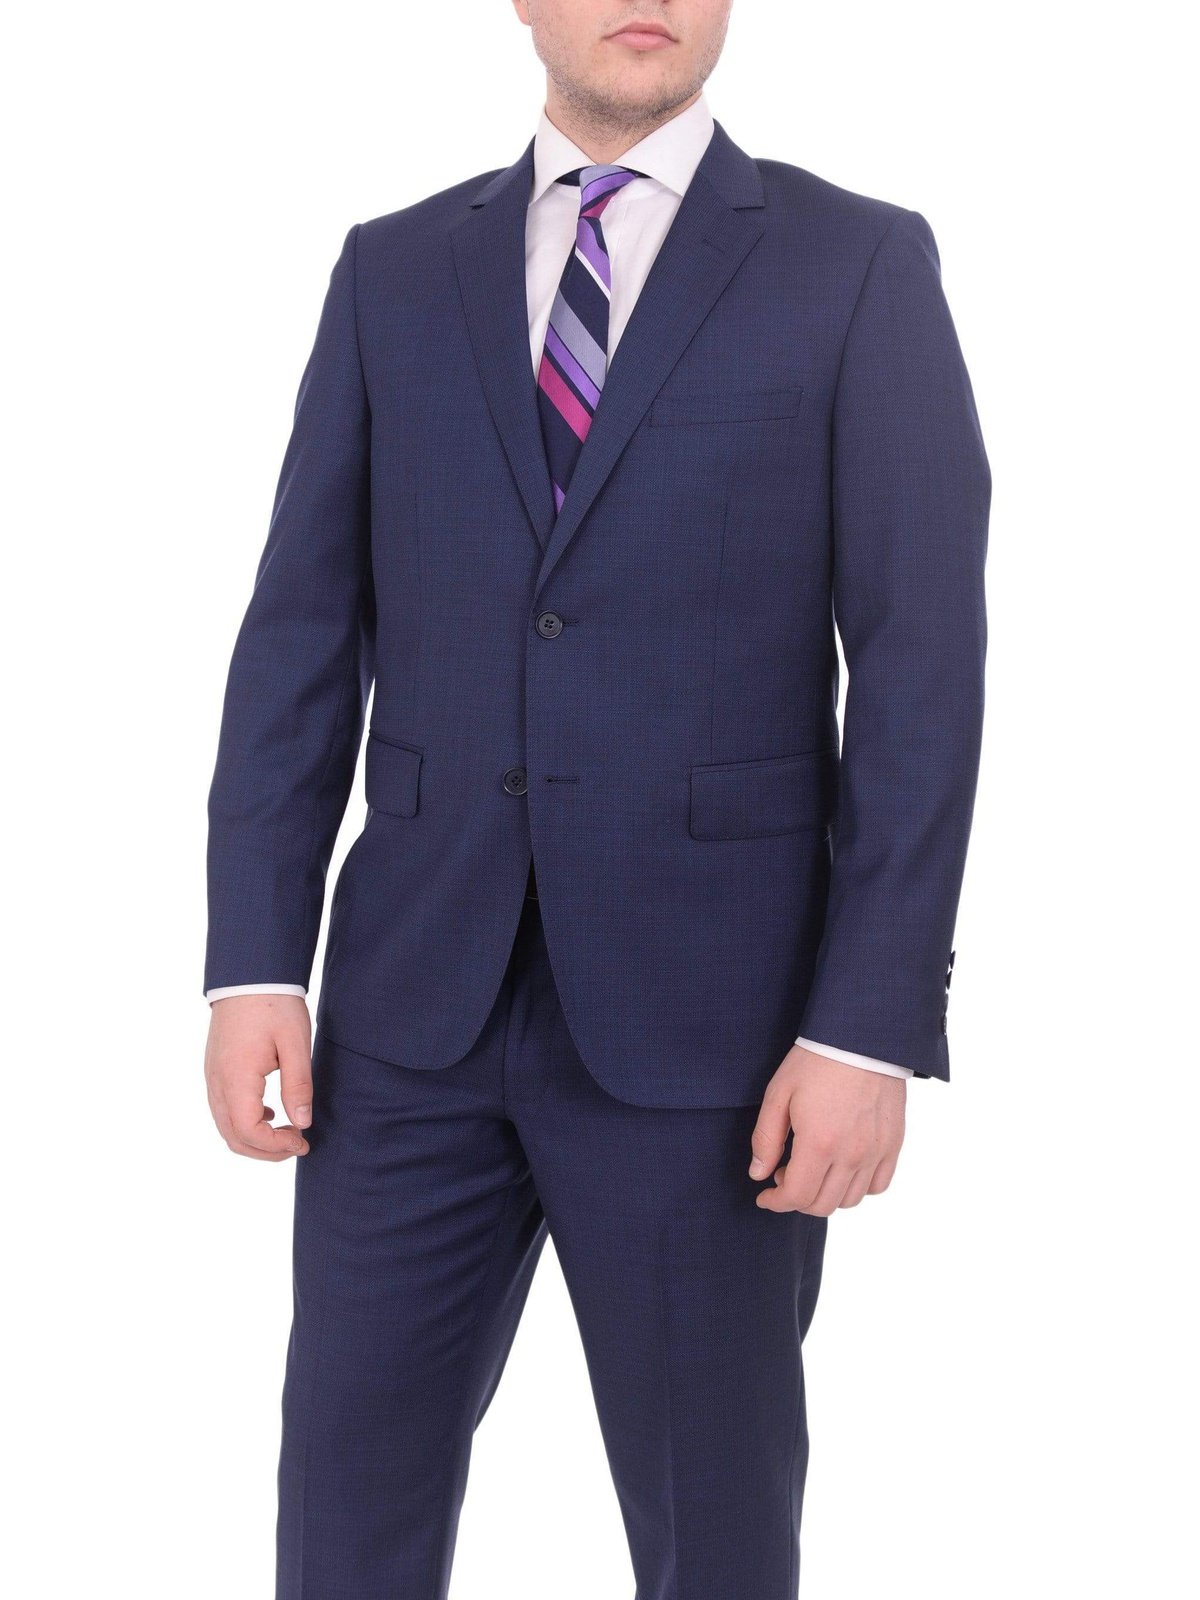 Label E TWO PIECE SUITS 42S Mens Modern Fit Blue Textured Two Button Wool Suit